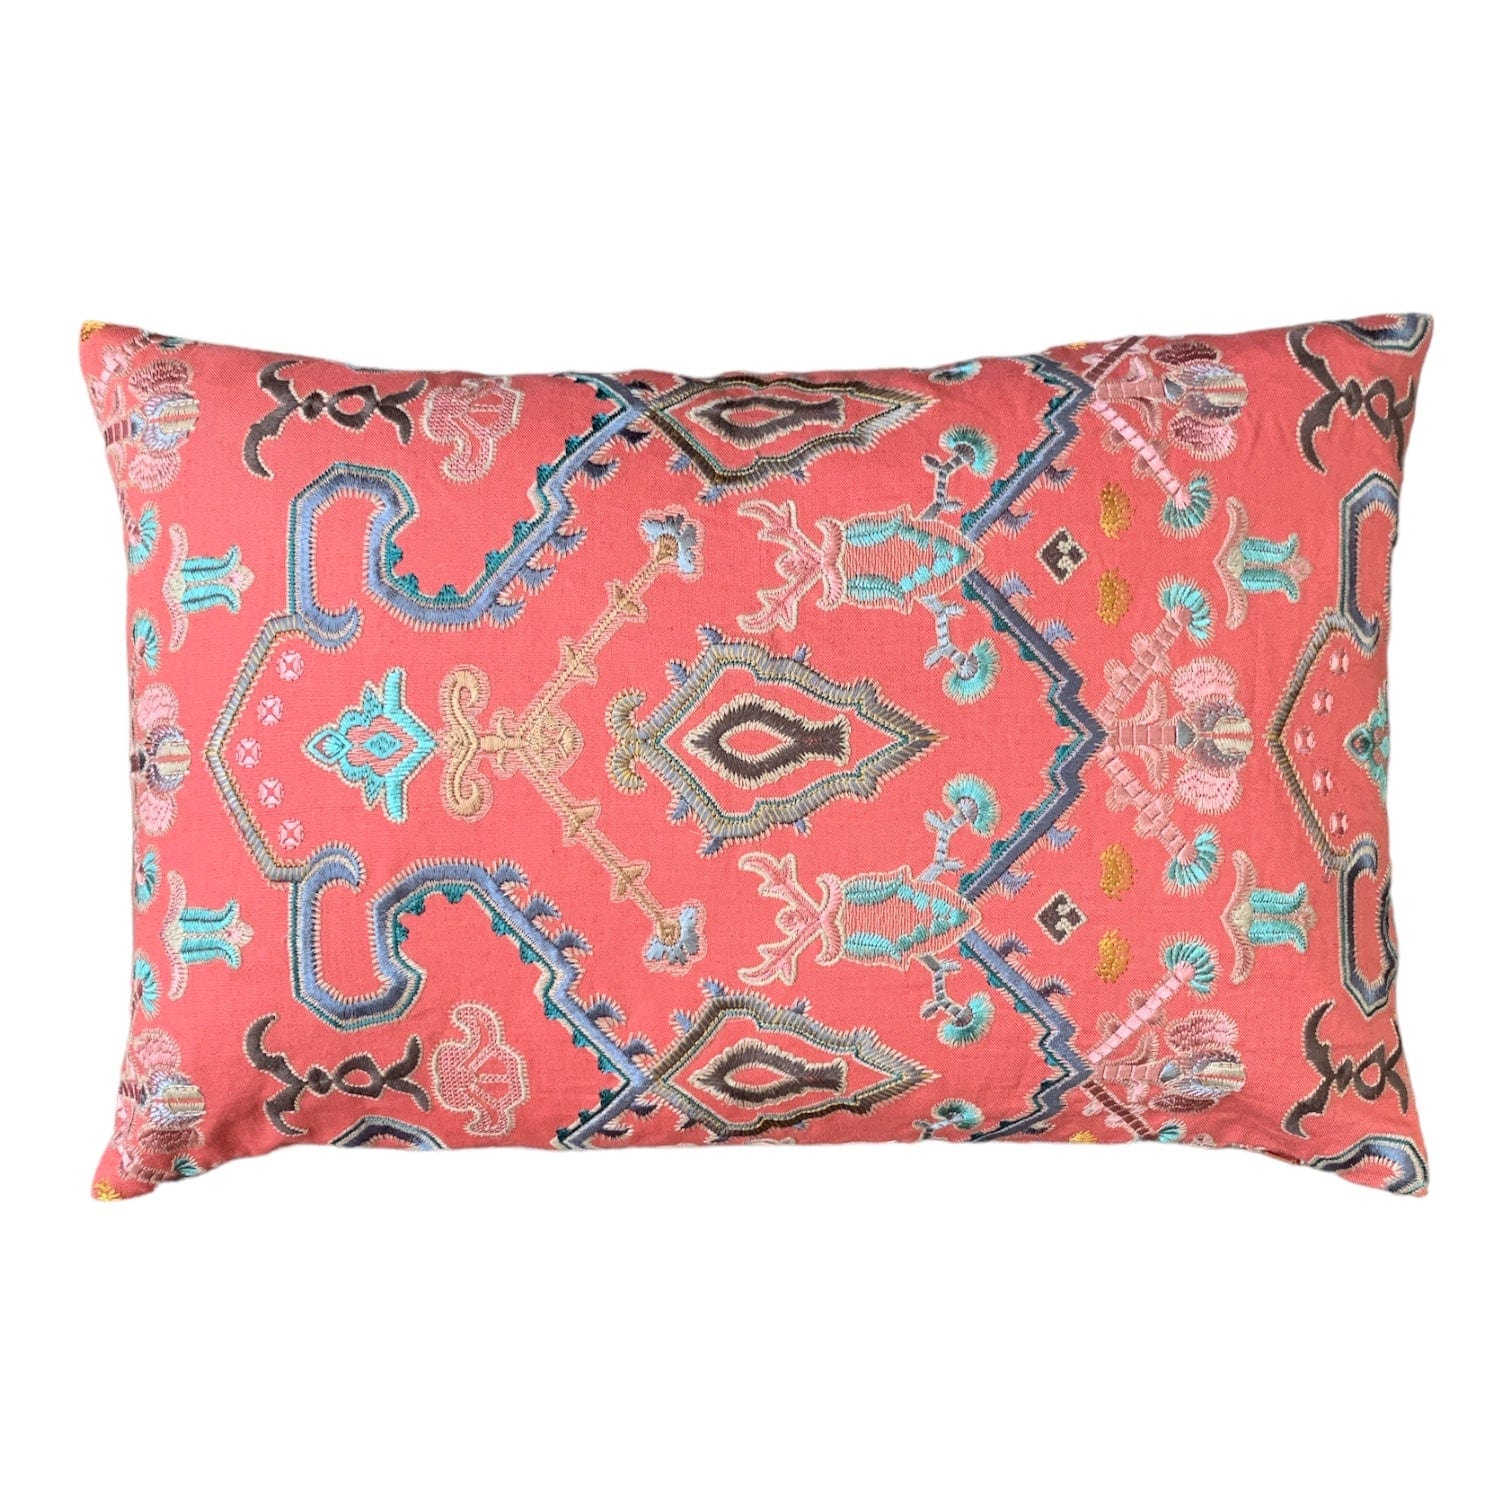 Colefax & Fowler Pink Embroidered 60x45cm Cushion. Little & Fox